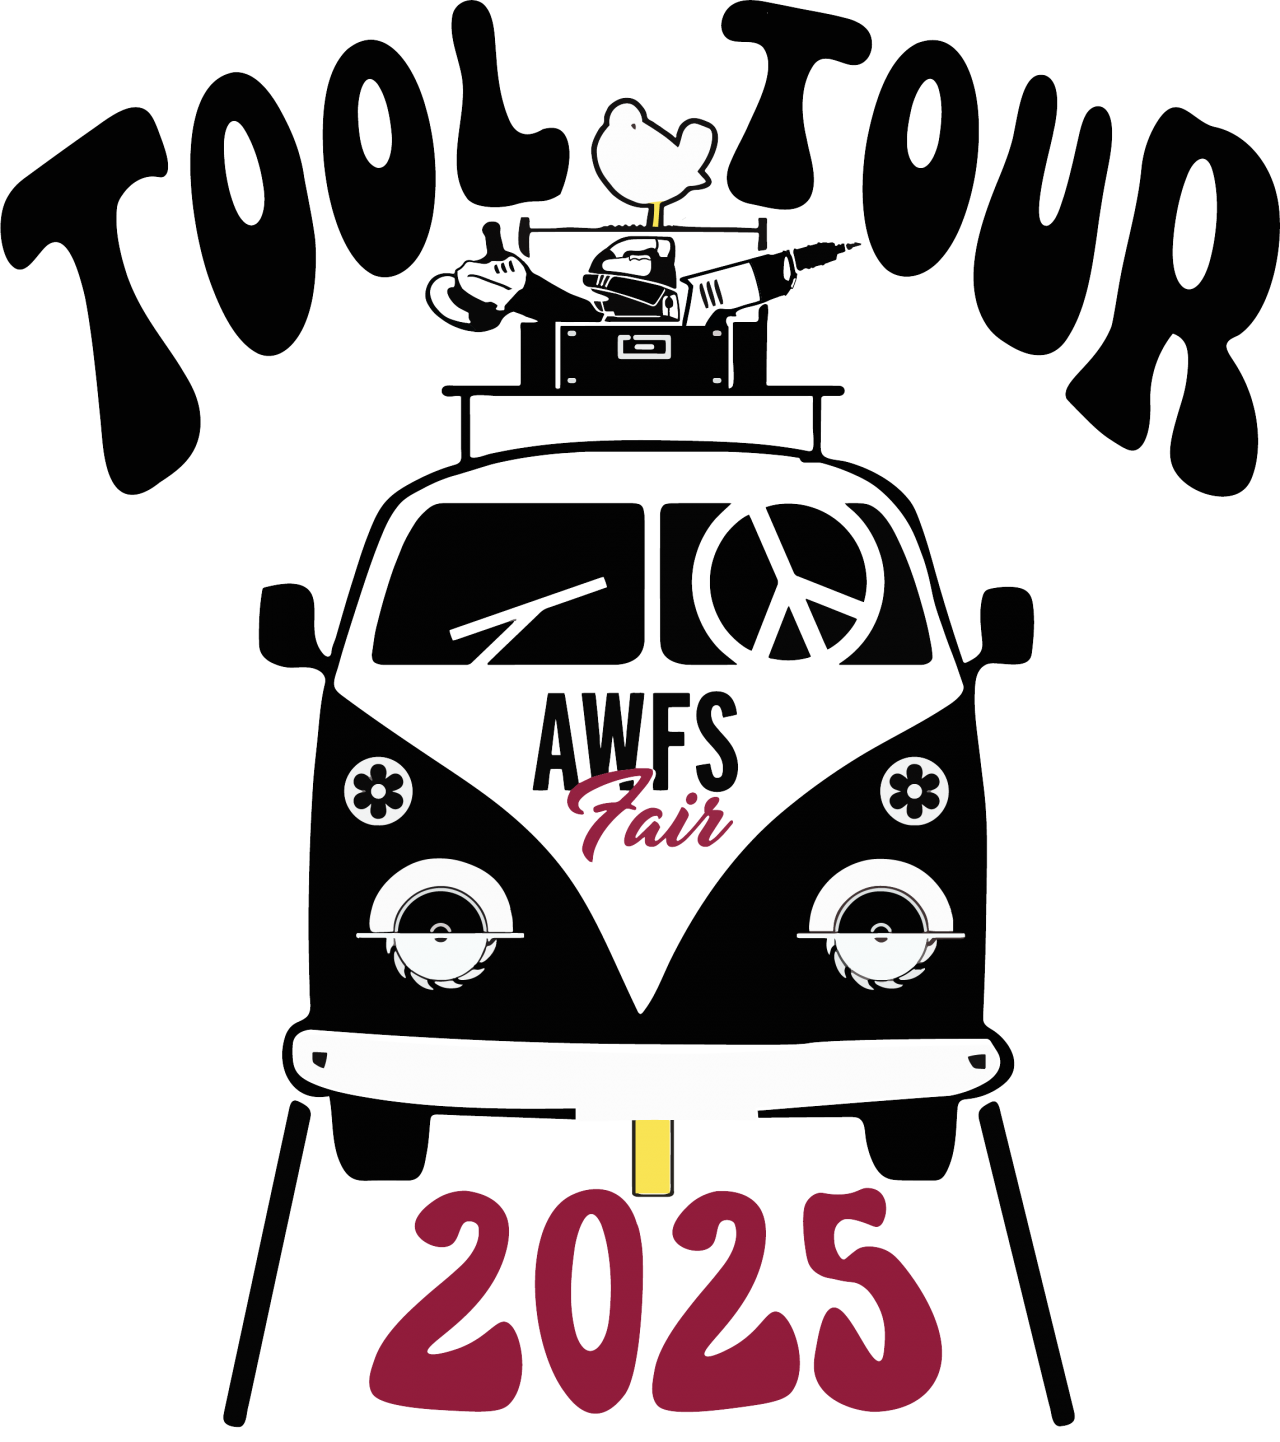 Tool Tour 2025 Logo Unveiling A Woodstock Experience at AWFS®Fair